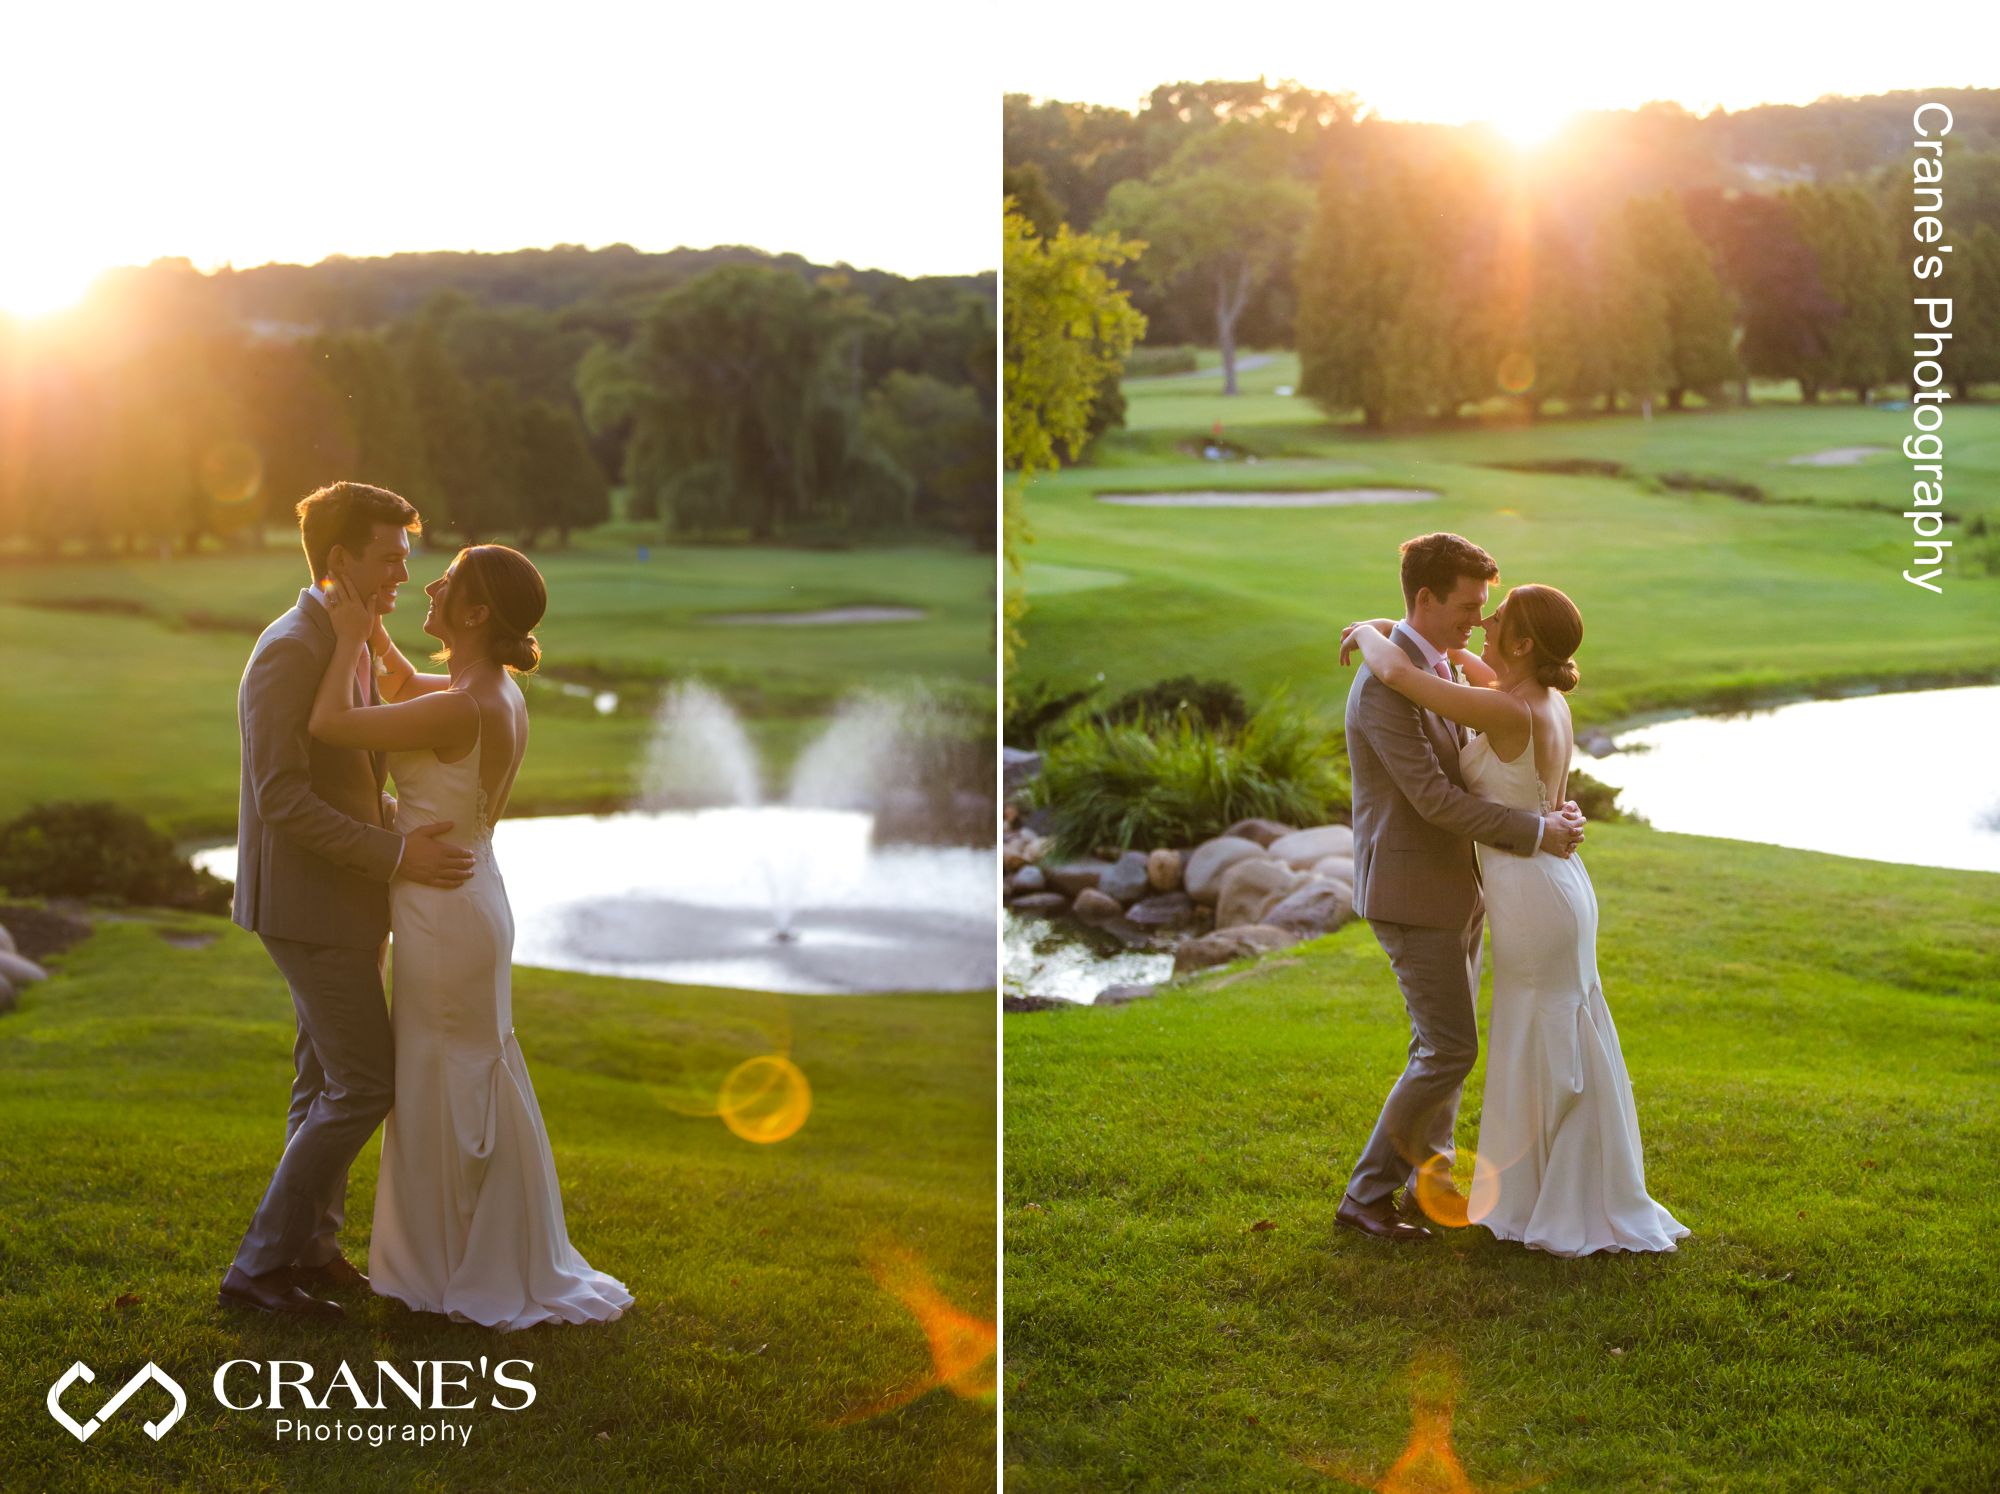 Wedding portrait taken at sunset at Big Foot Country Club